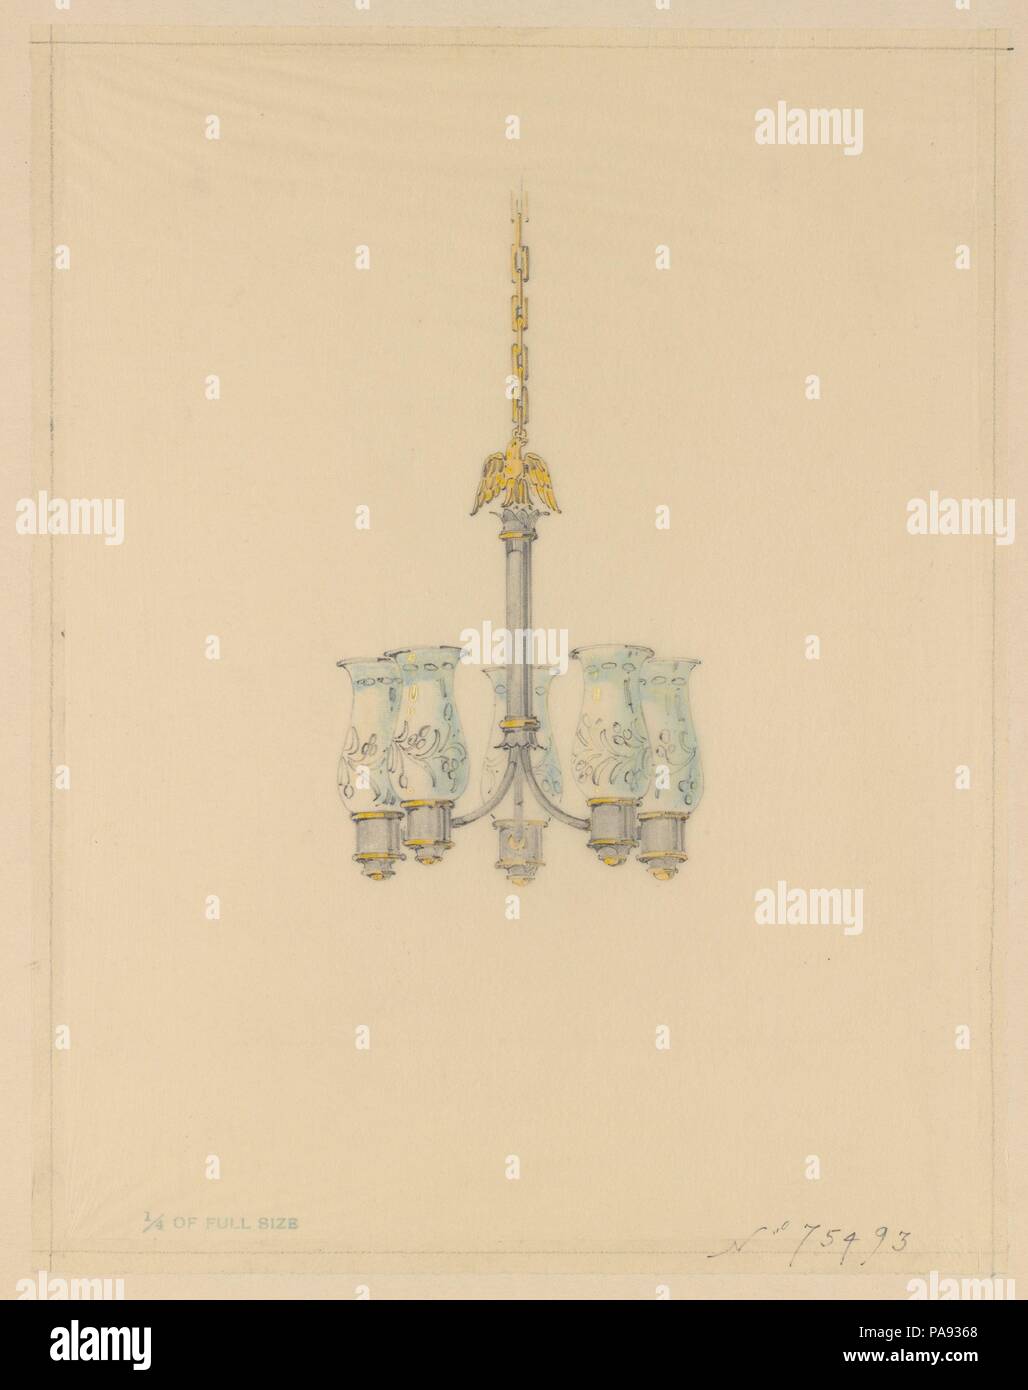 Design for hanging fixture. Artist: Louis Comfort Tiffany (American, New York 1848-1933 New York). Culture: American. Dimensions: Storage (mat size): 22 x 16 in. (55.9 x 40.6 cm)  22 1/8 × 15 in. (56.2 × 38.1 cm)  Tracing: 12 5/8 × 9 7/8 in. (32.1 × 25.1 cm). Maker: Possibly Tiffany Glass and Decorating Company (American, 1892-1902); Possibly Tiffany Studios (1902-32); Possibly Tiffany Glass Company (1885-92). Date: ca. 1905-20. Museum: Metropolitan Museum of Art, New York, USA. Stock Photo